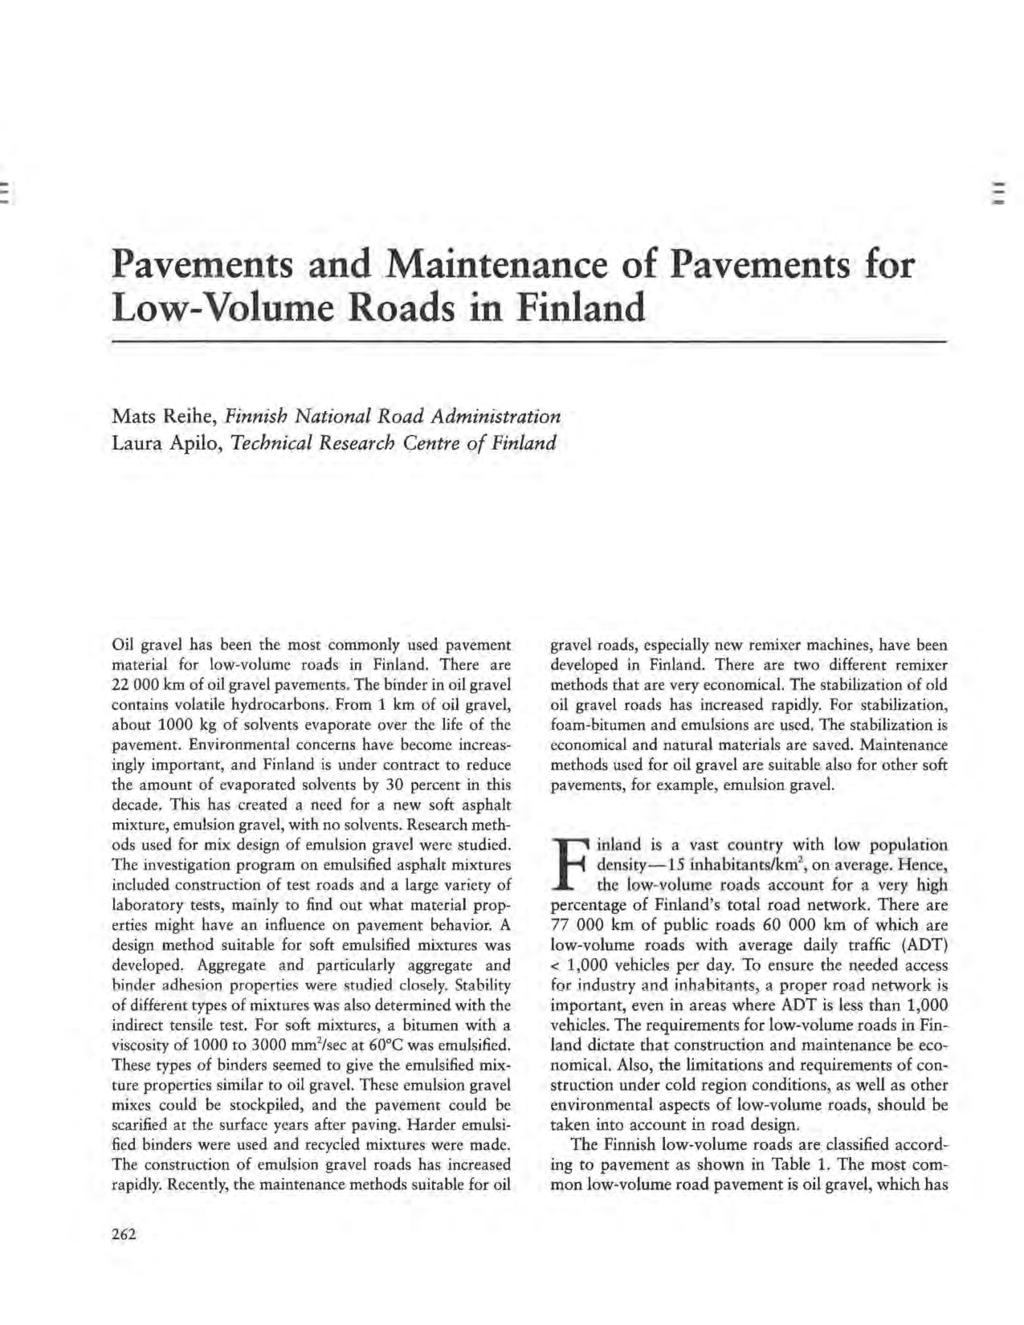 Pavements and Maintenance of Pavements for Low-Volume Roads in Finland Mats Reihe, Finnish National Road Administration Laura Apilo, Technical Research Centre of Finland Oil gravel has been the most